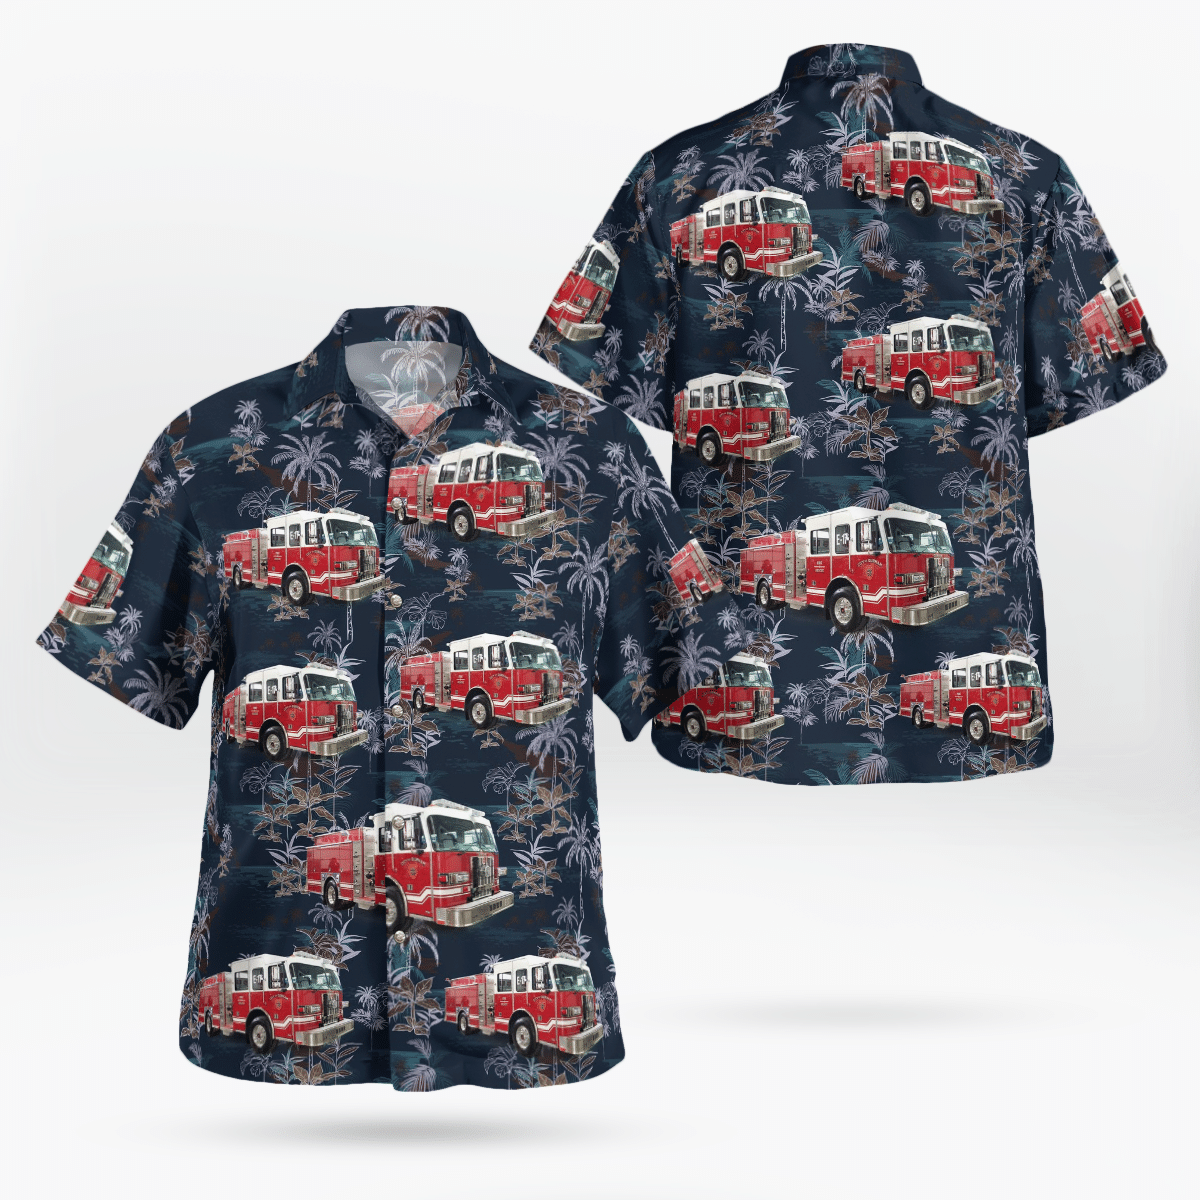 If you want to be noticed, wear These Trendy Hawaiian Shirt 108